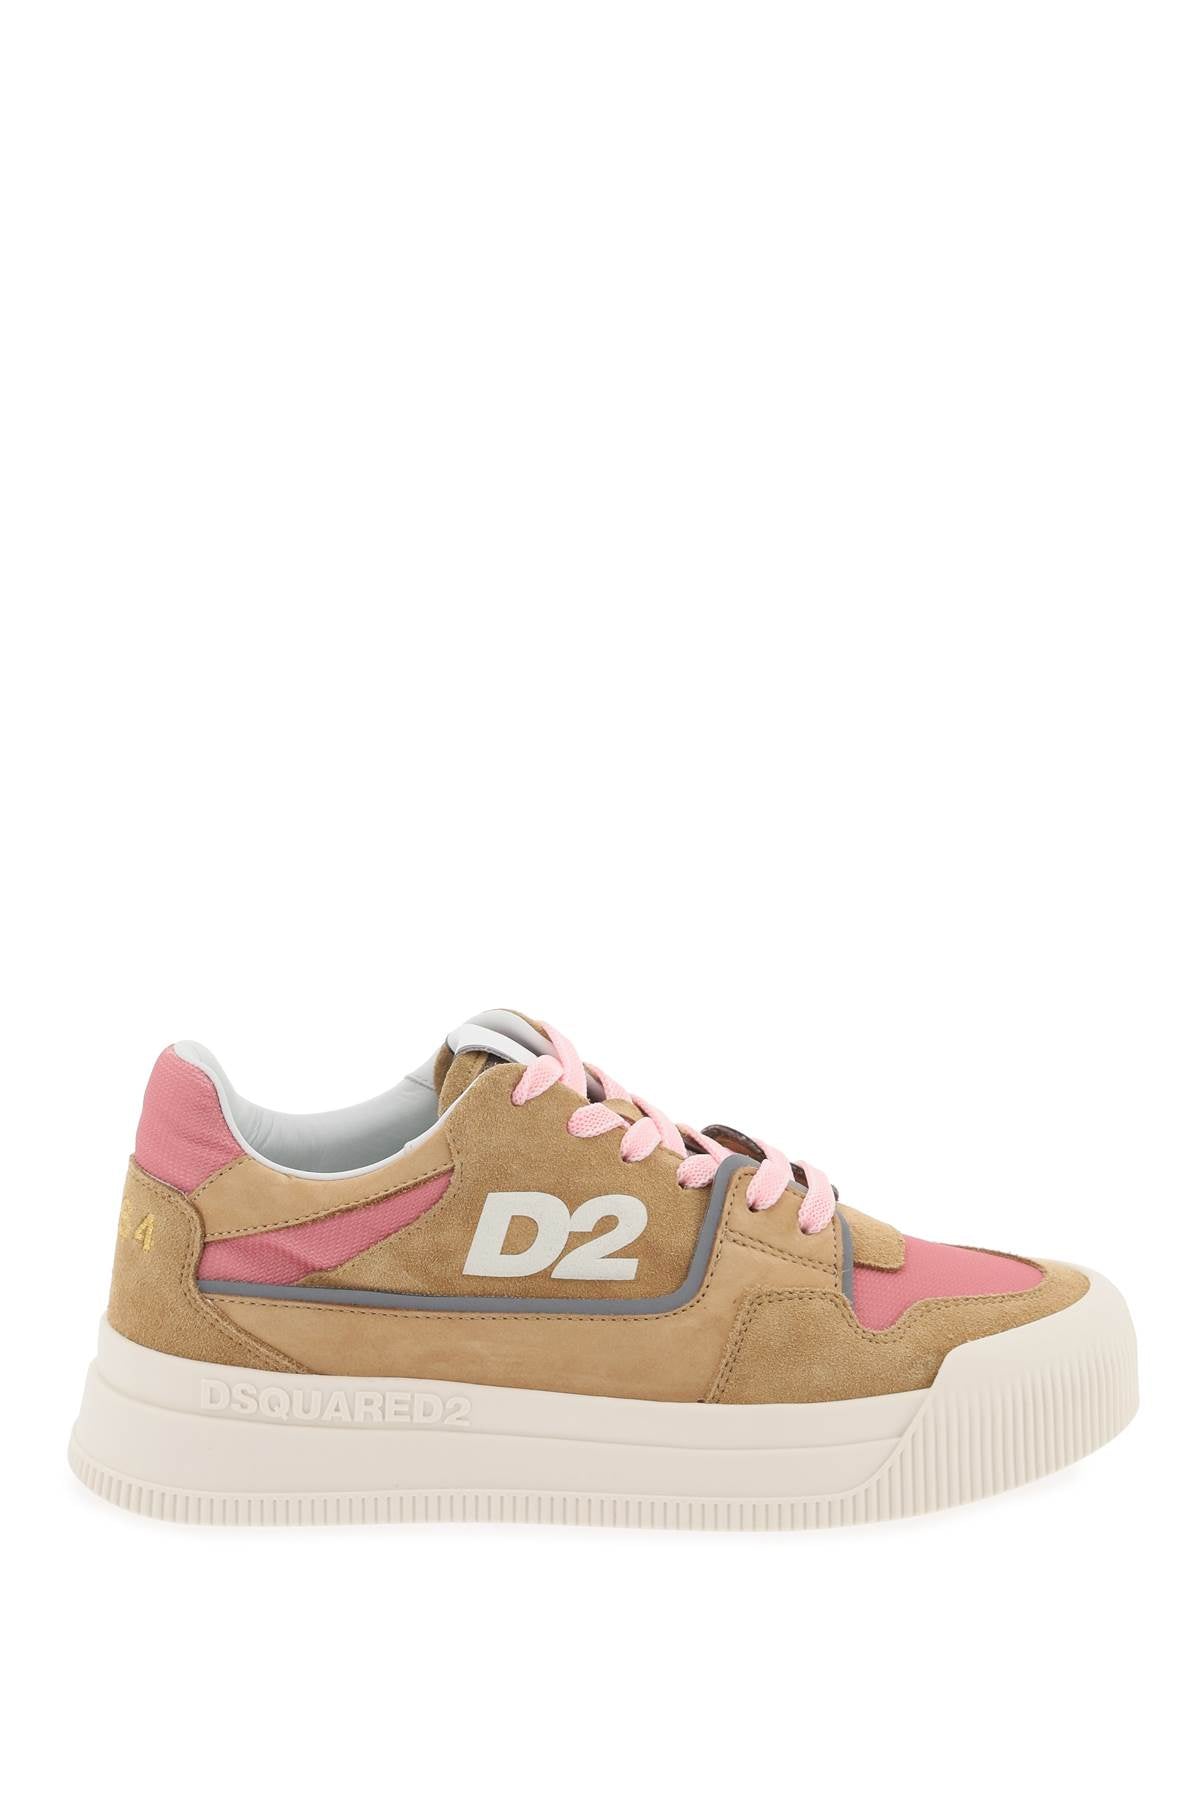 Dsquared2 suede new jersey sneakers in leather-0